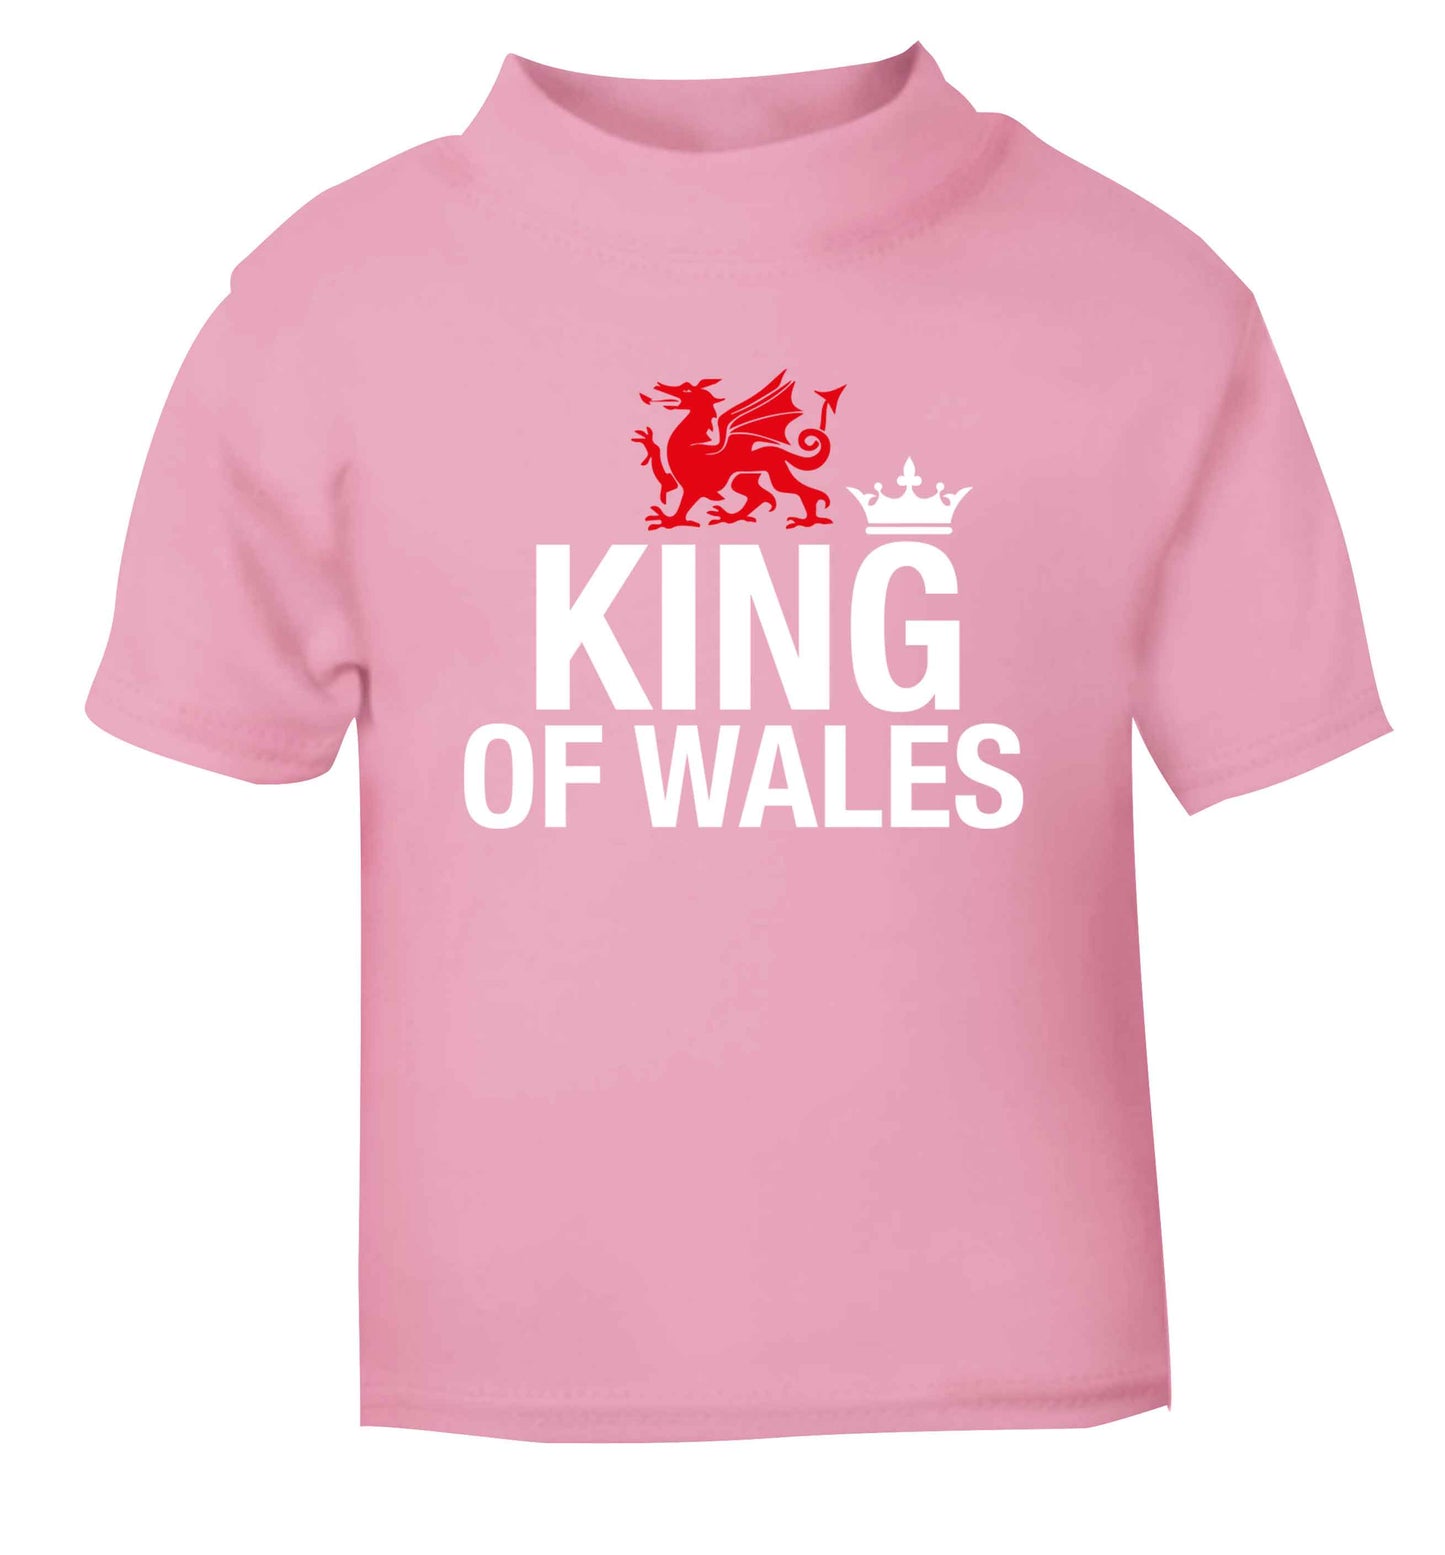 King of Wales light pink Baby Toddler Tshirt 2 Years